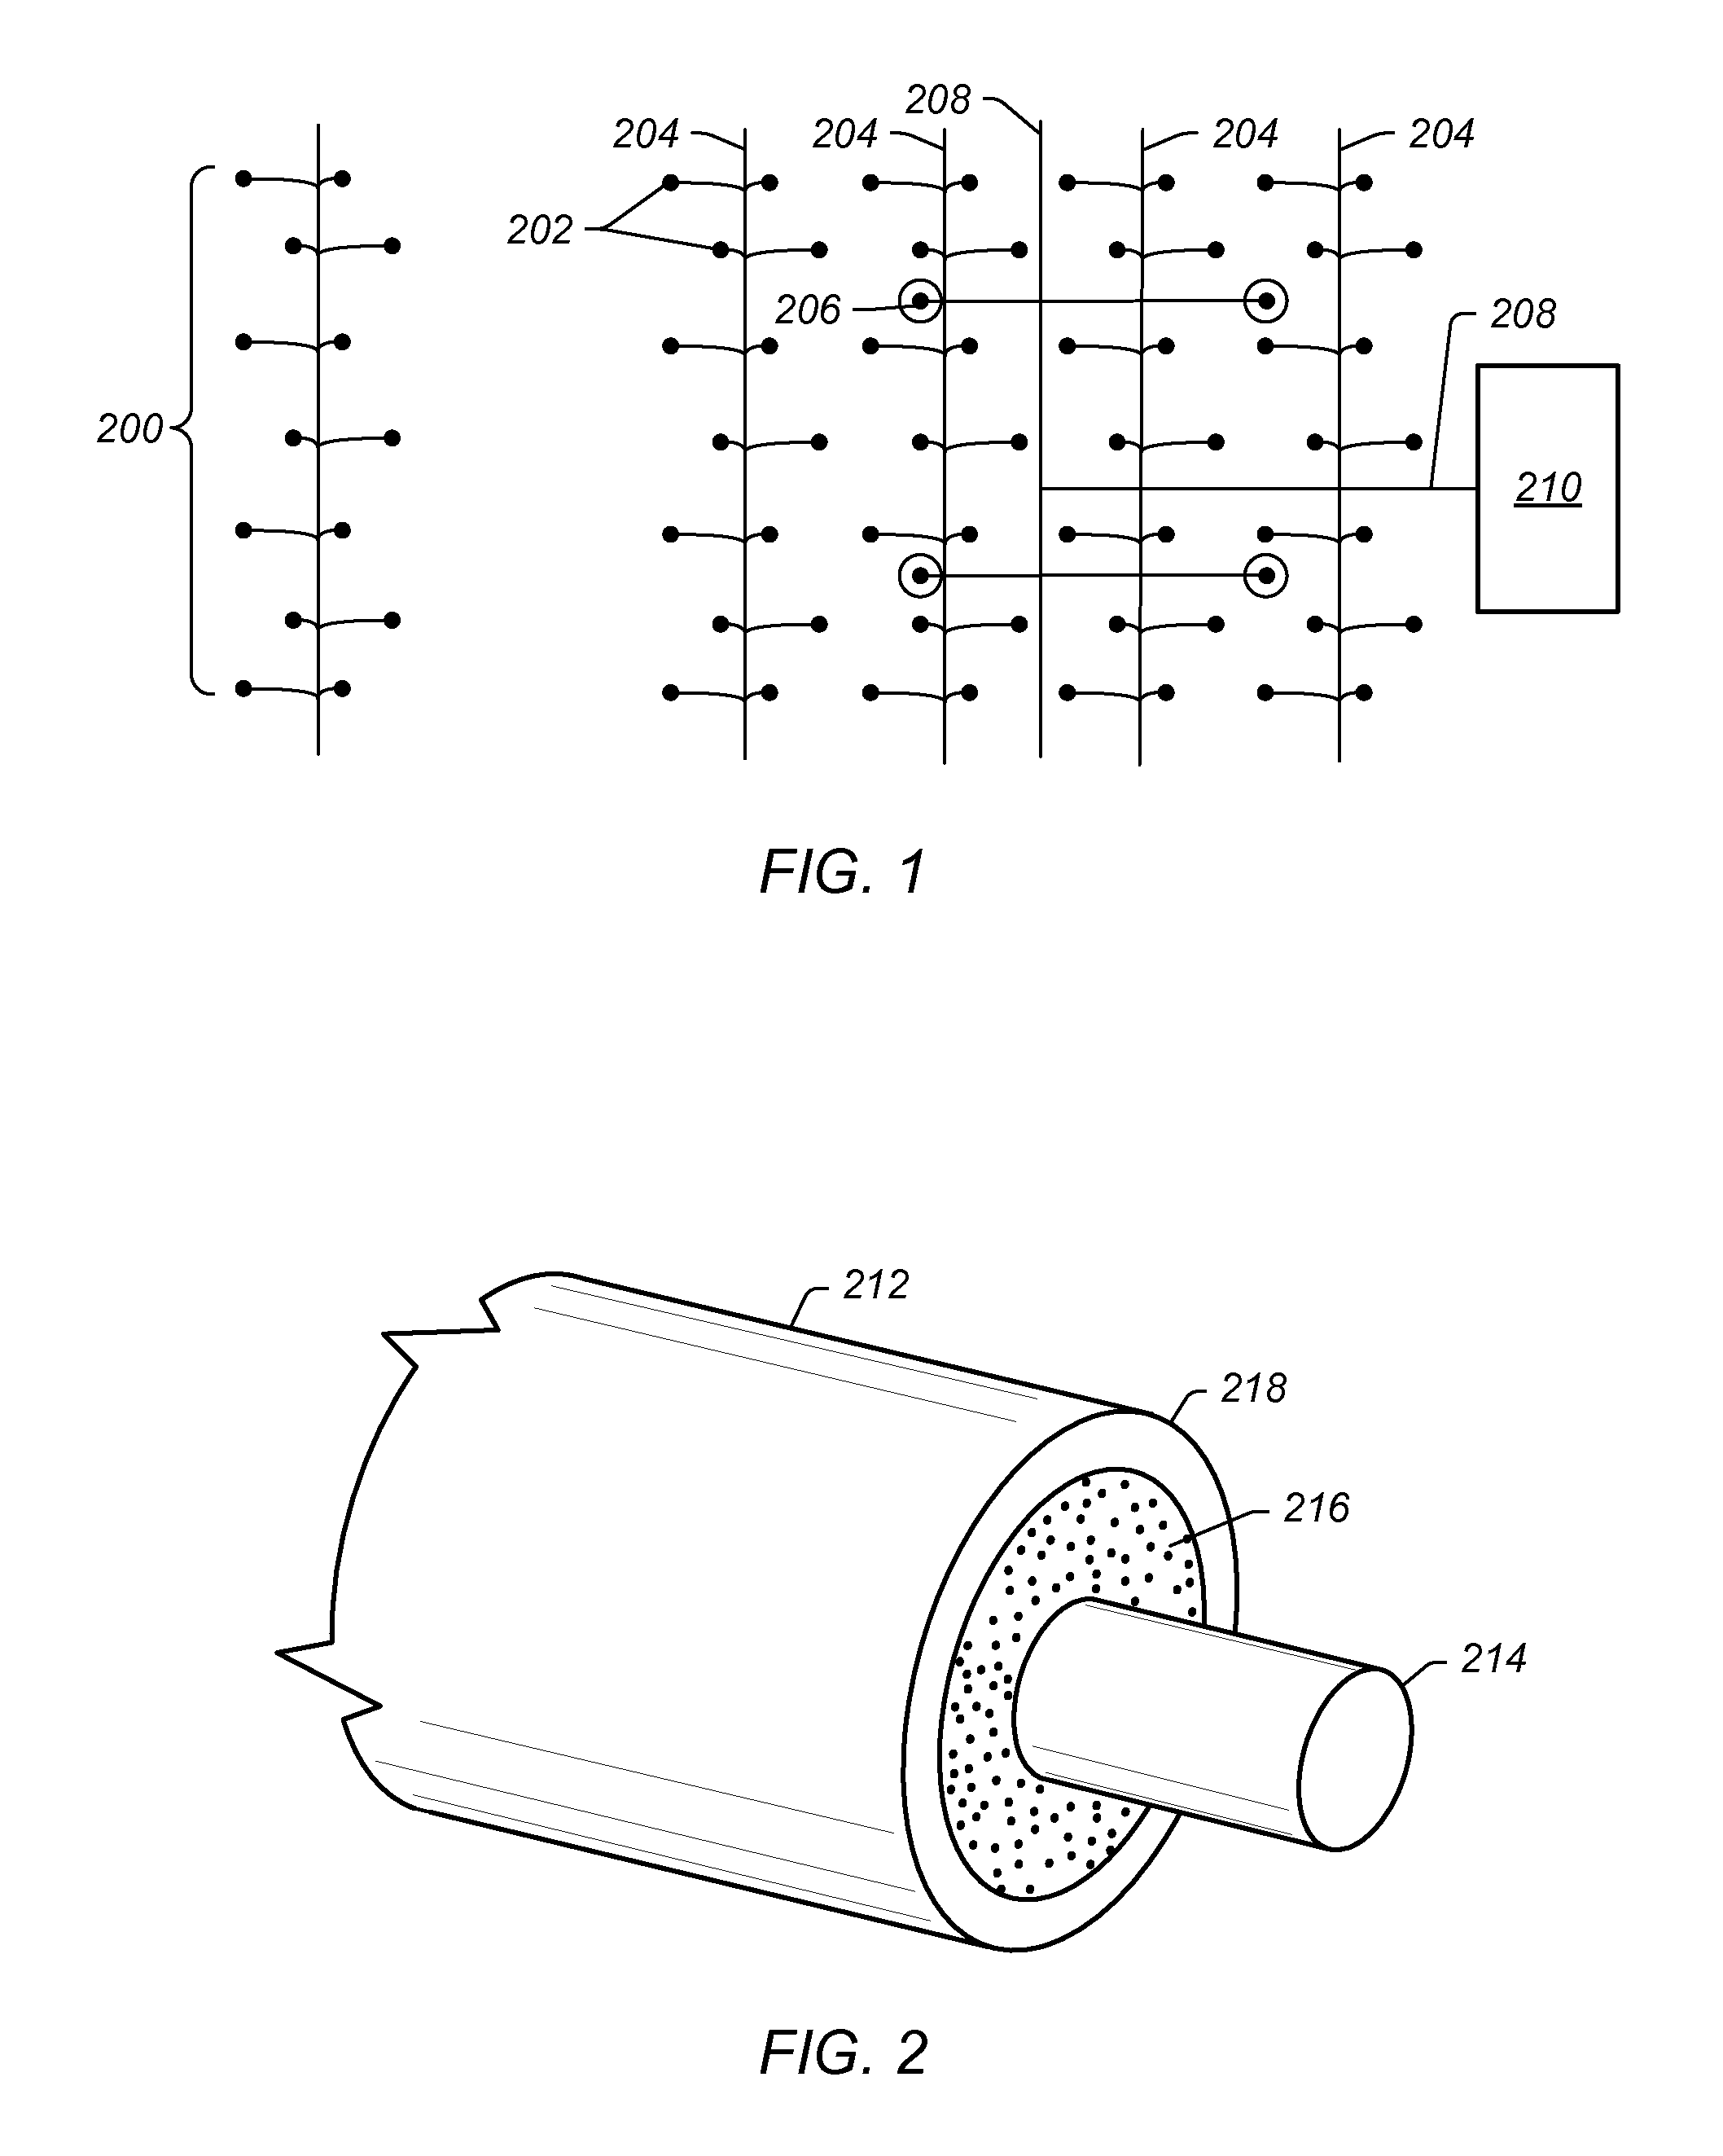 Compaction of electrical insulation for joining insulated conductors